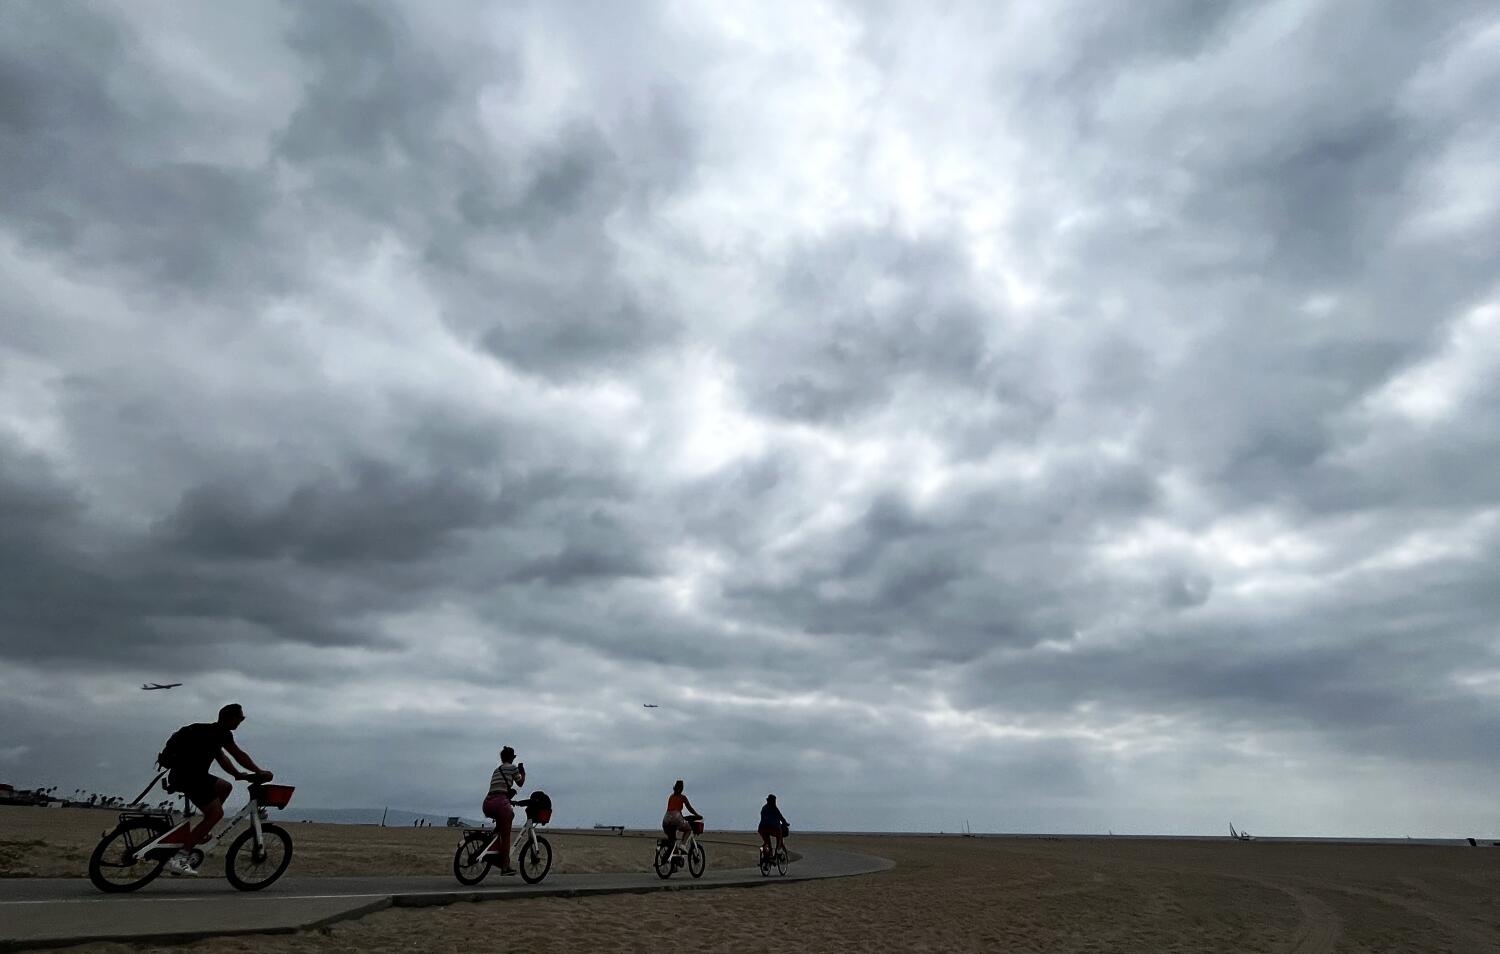 Cloudy skies, light rain expected to continue Saturday across Los Angeles County 